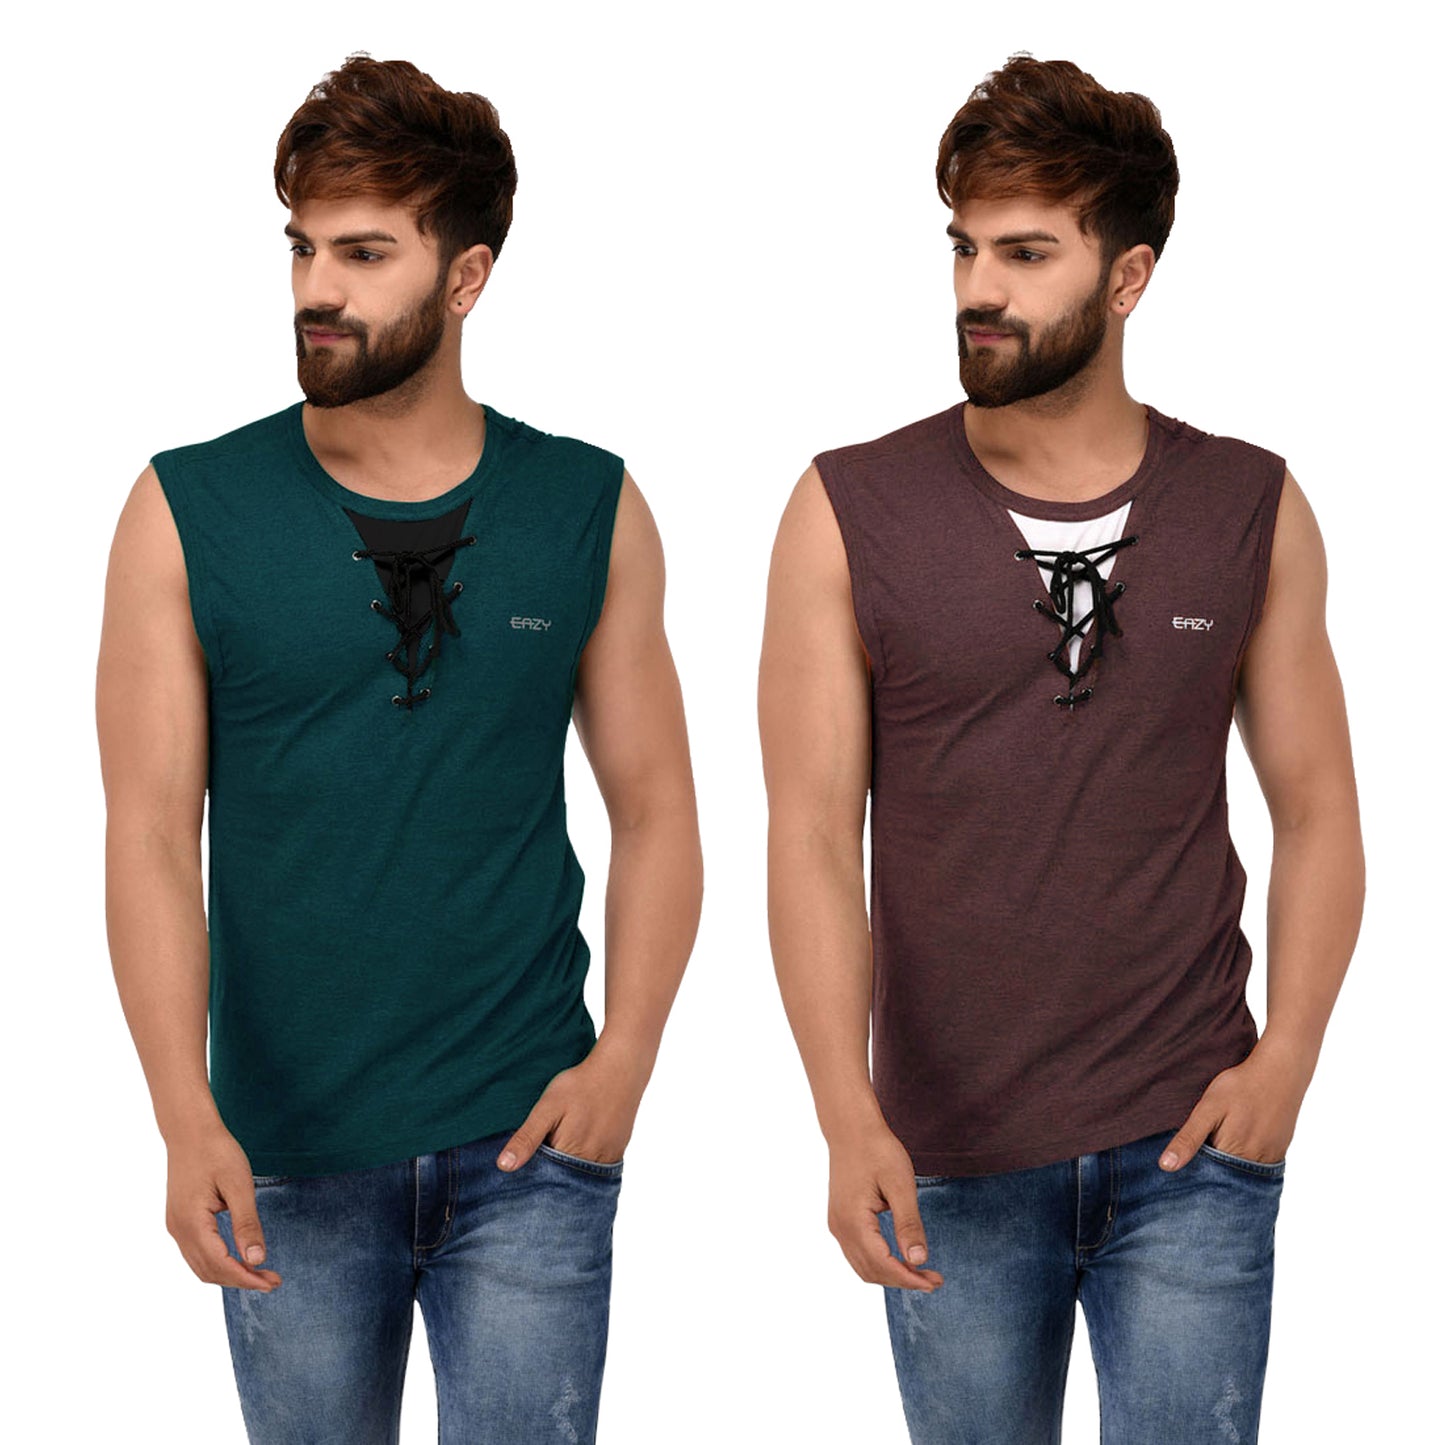 Sirtex Eazy Racer Lace-Up Vest (Pack of 2)